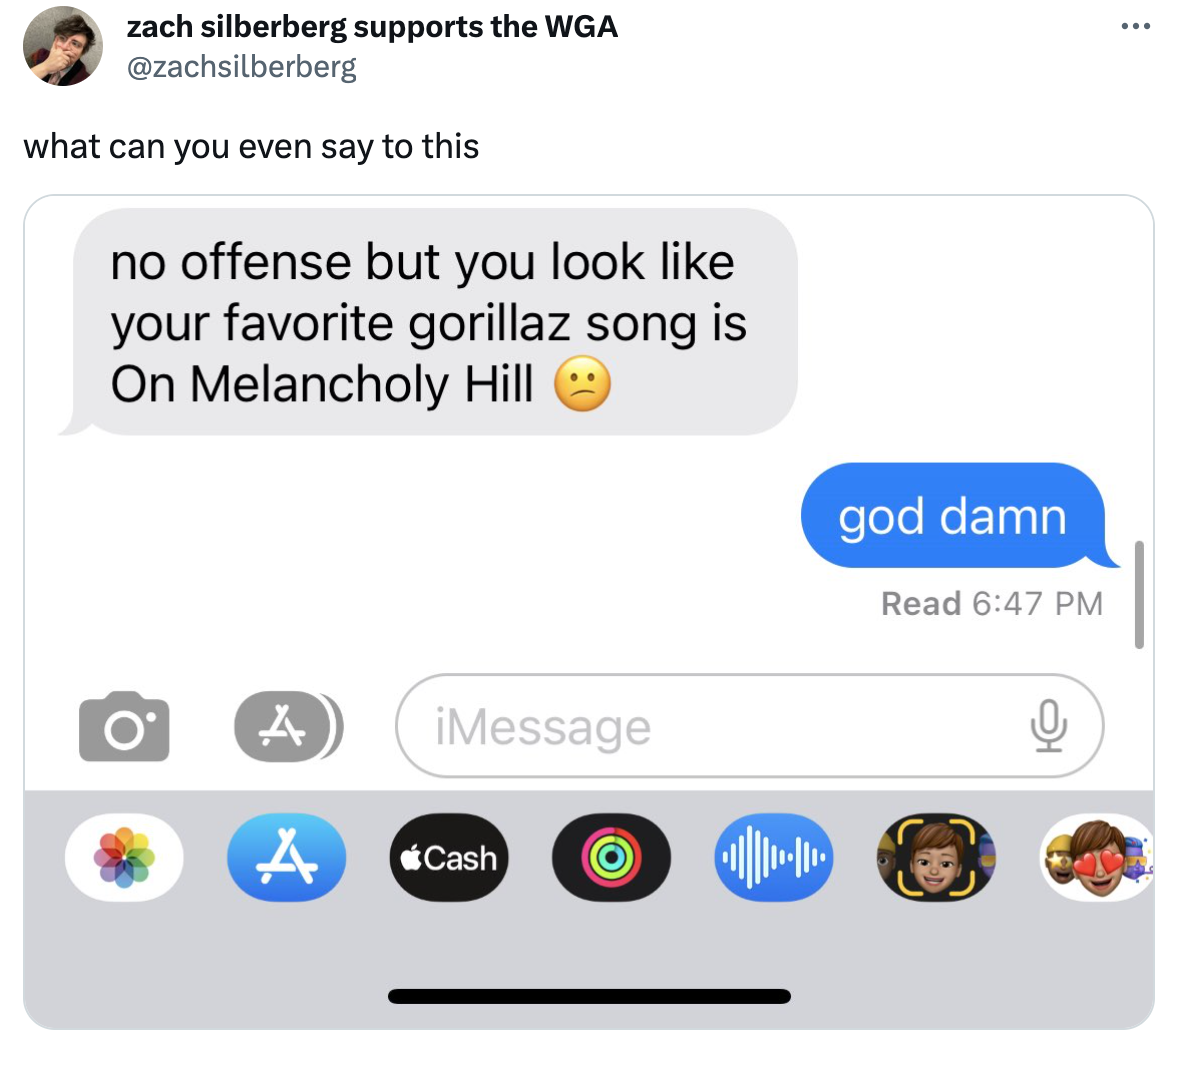 twitter highlights funny tweets  - haven t seen you in 3 months can i see you bae - zach silberberg supports the Wga what can you even say to this no offense but you look your favorite gorillaz song is On Melancholy Hill O A A iMessage Cash god damn Read